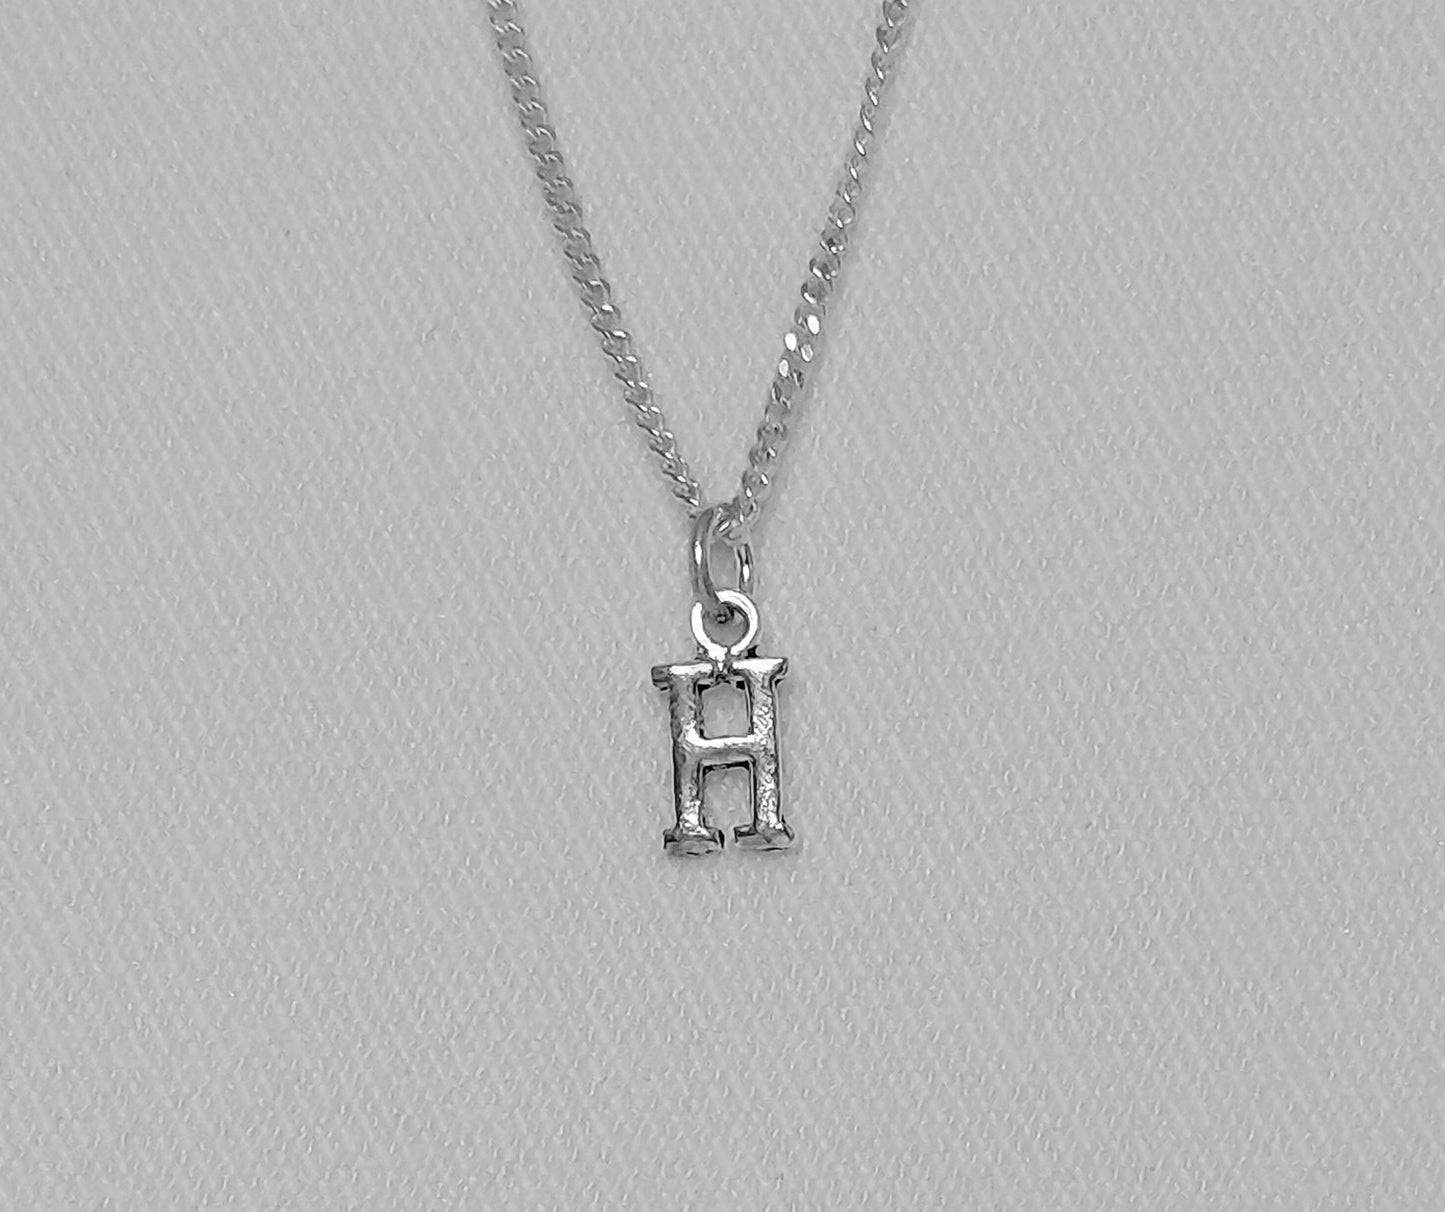 Sterling Silver H Initial Pendant